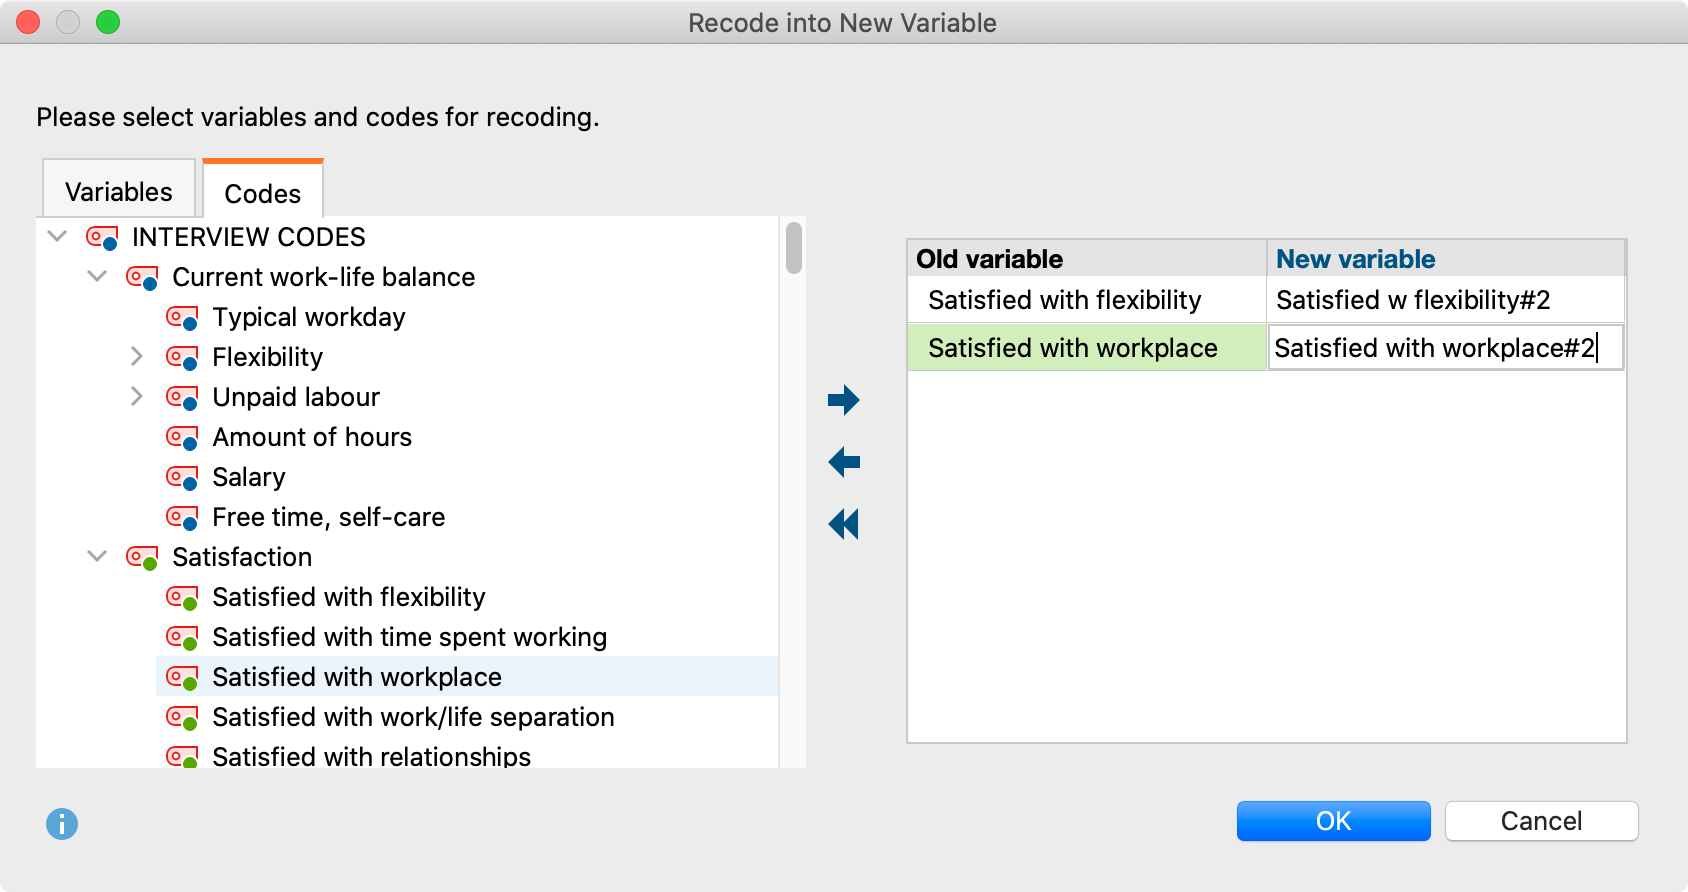 Select codes that you want to recode as new variables